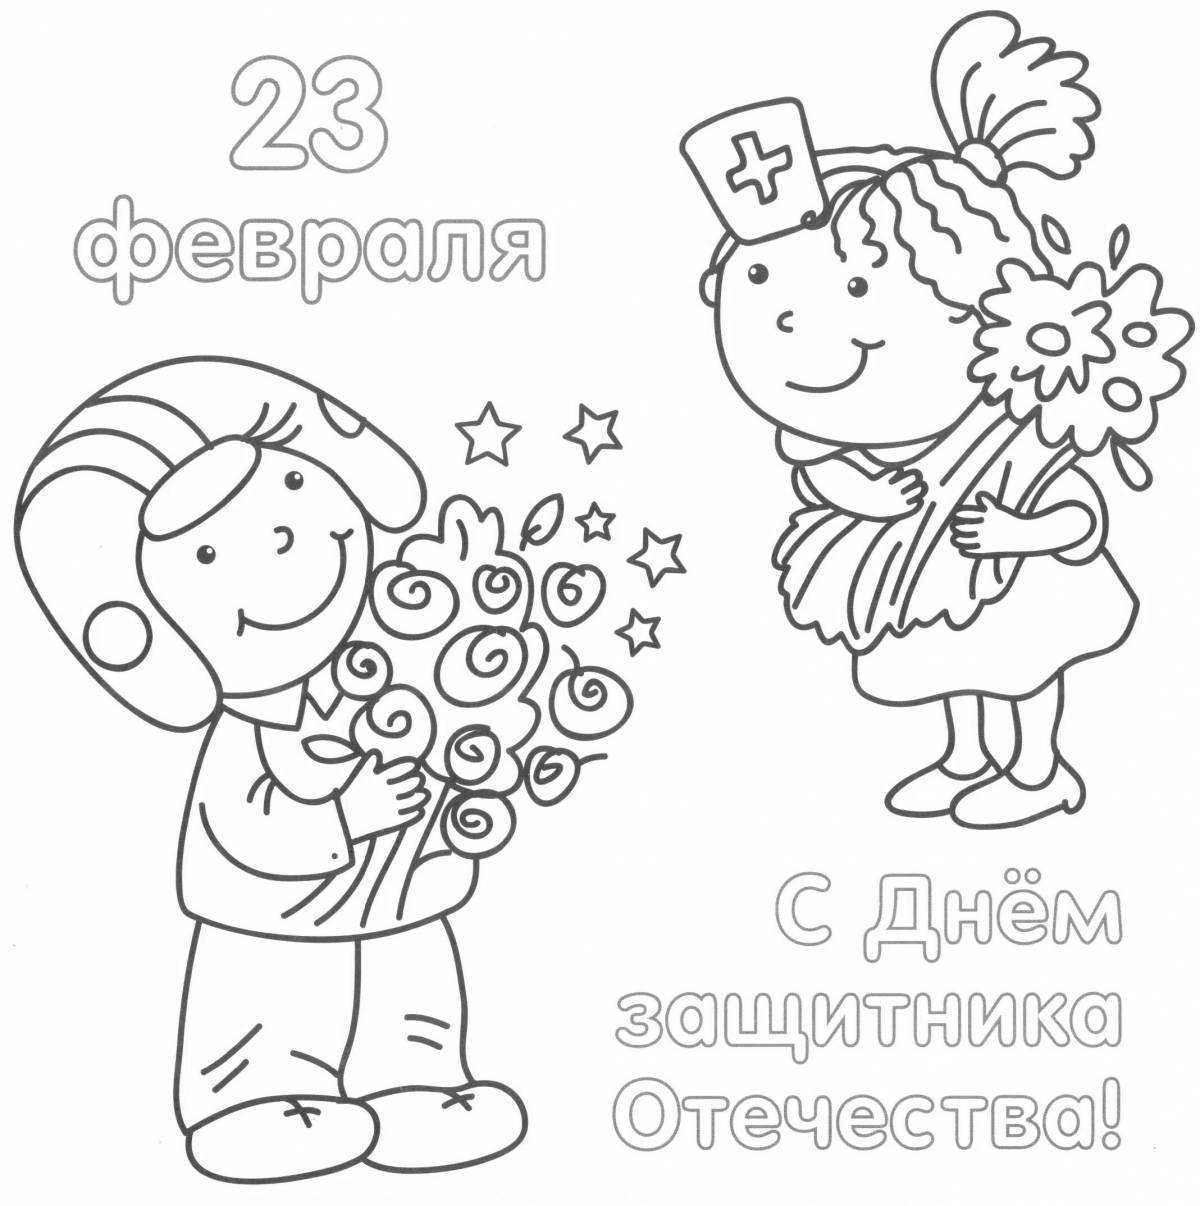 Playful postcard with Defender of the Fatherland Day February 23